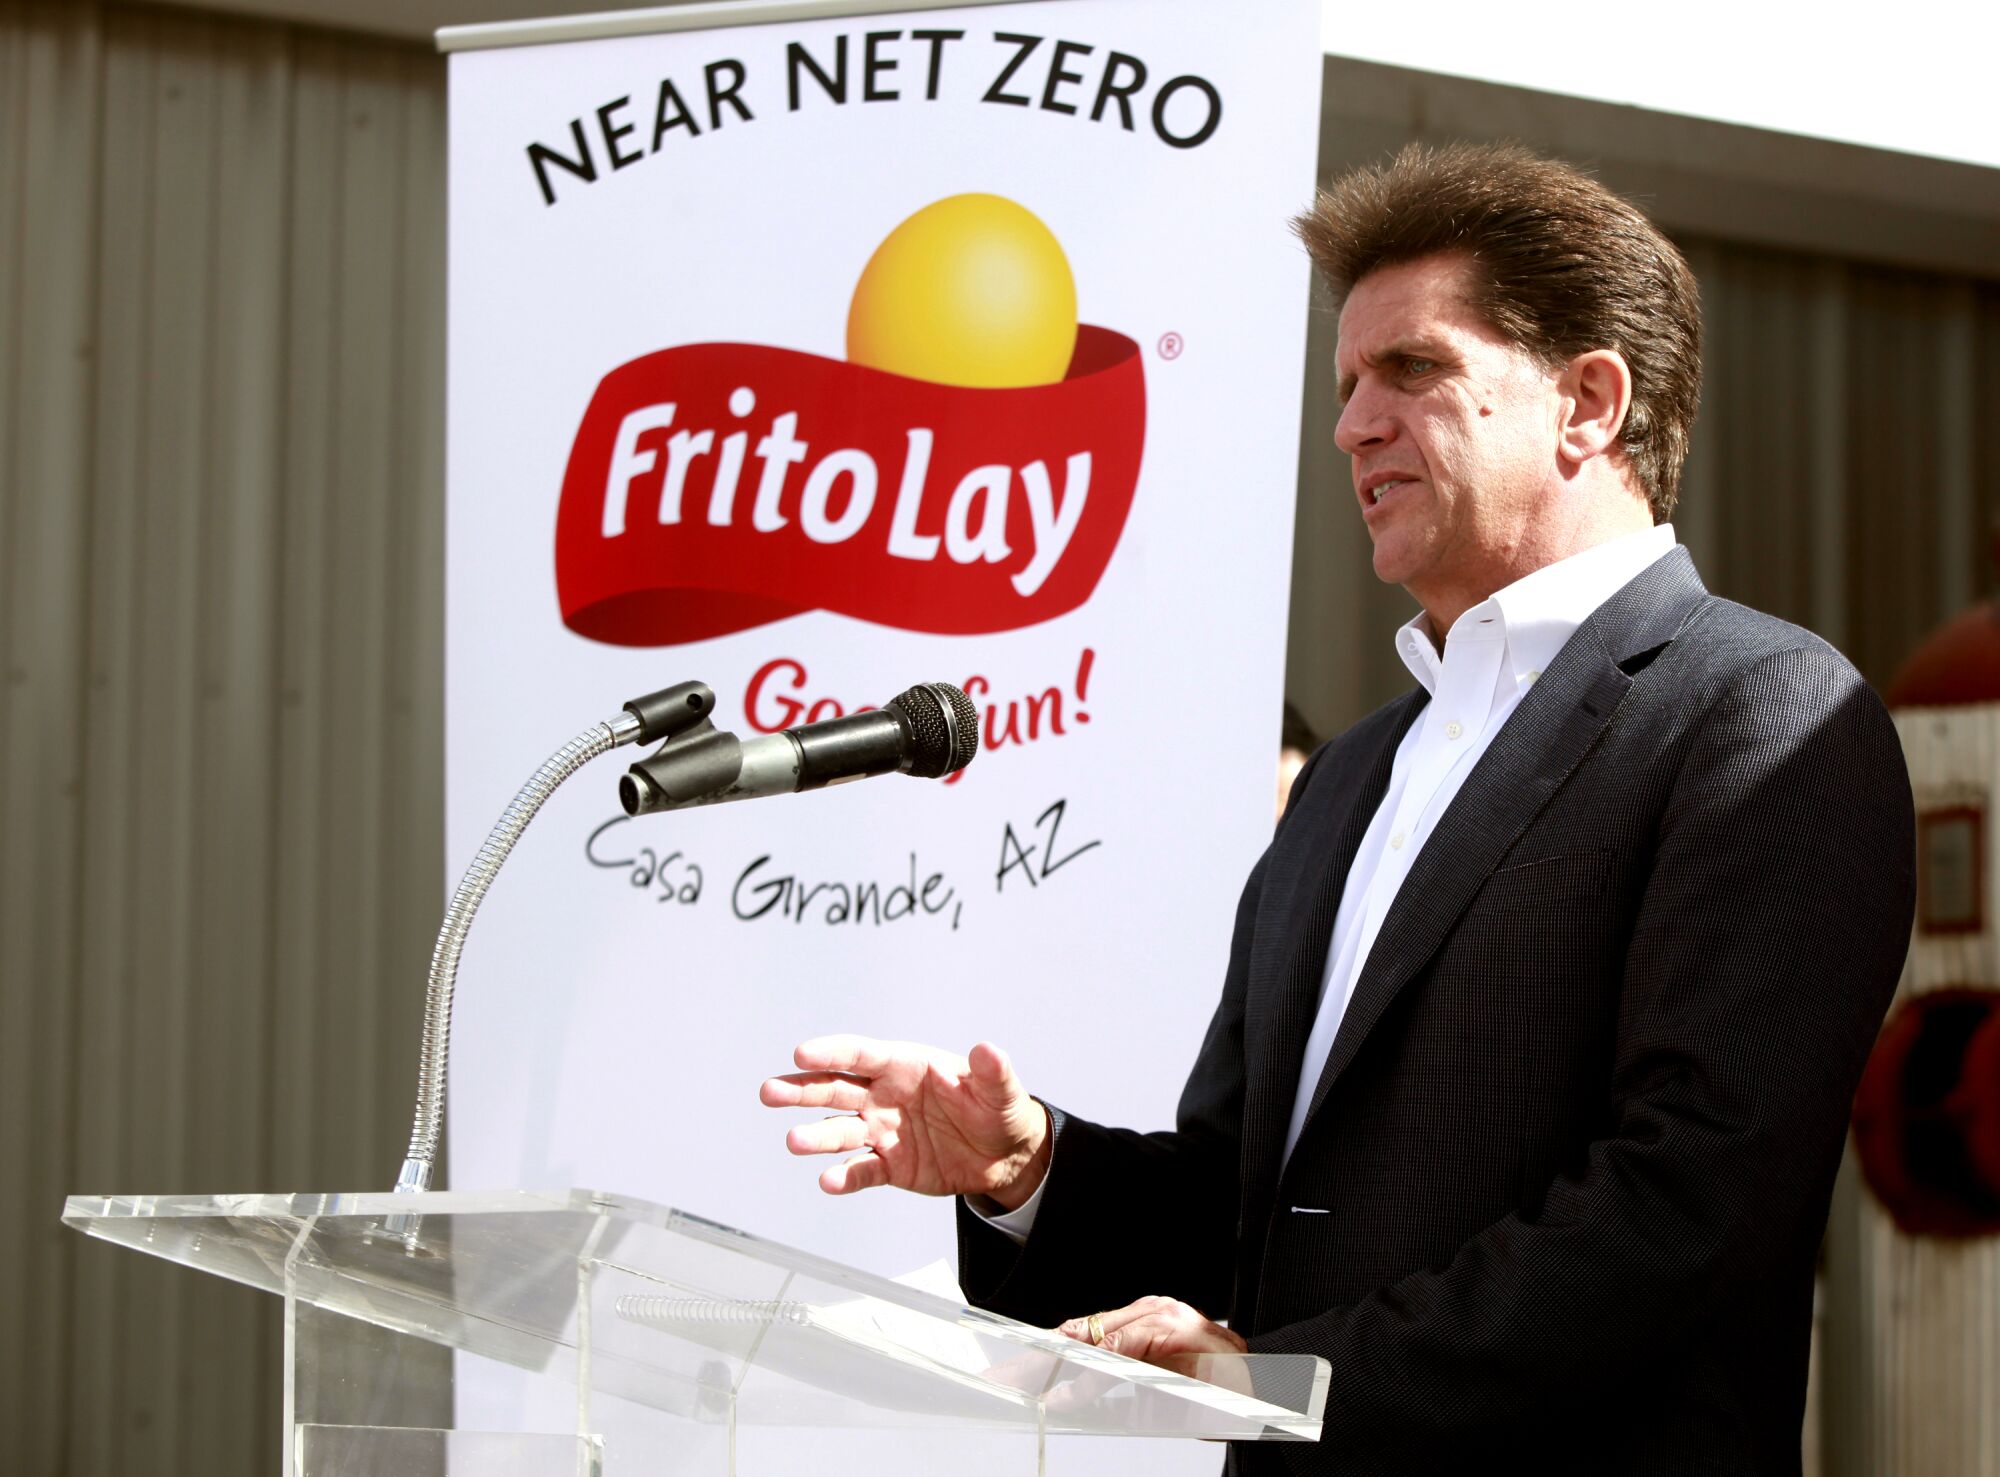 Al Carey speaks at a lectern in front of a sign with Frito-Lay's logo that says Near net zero